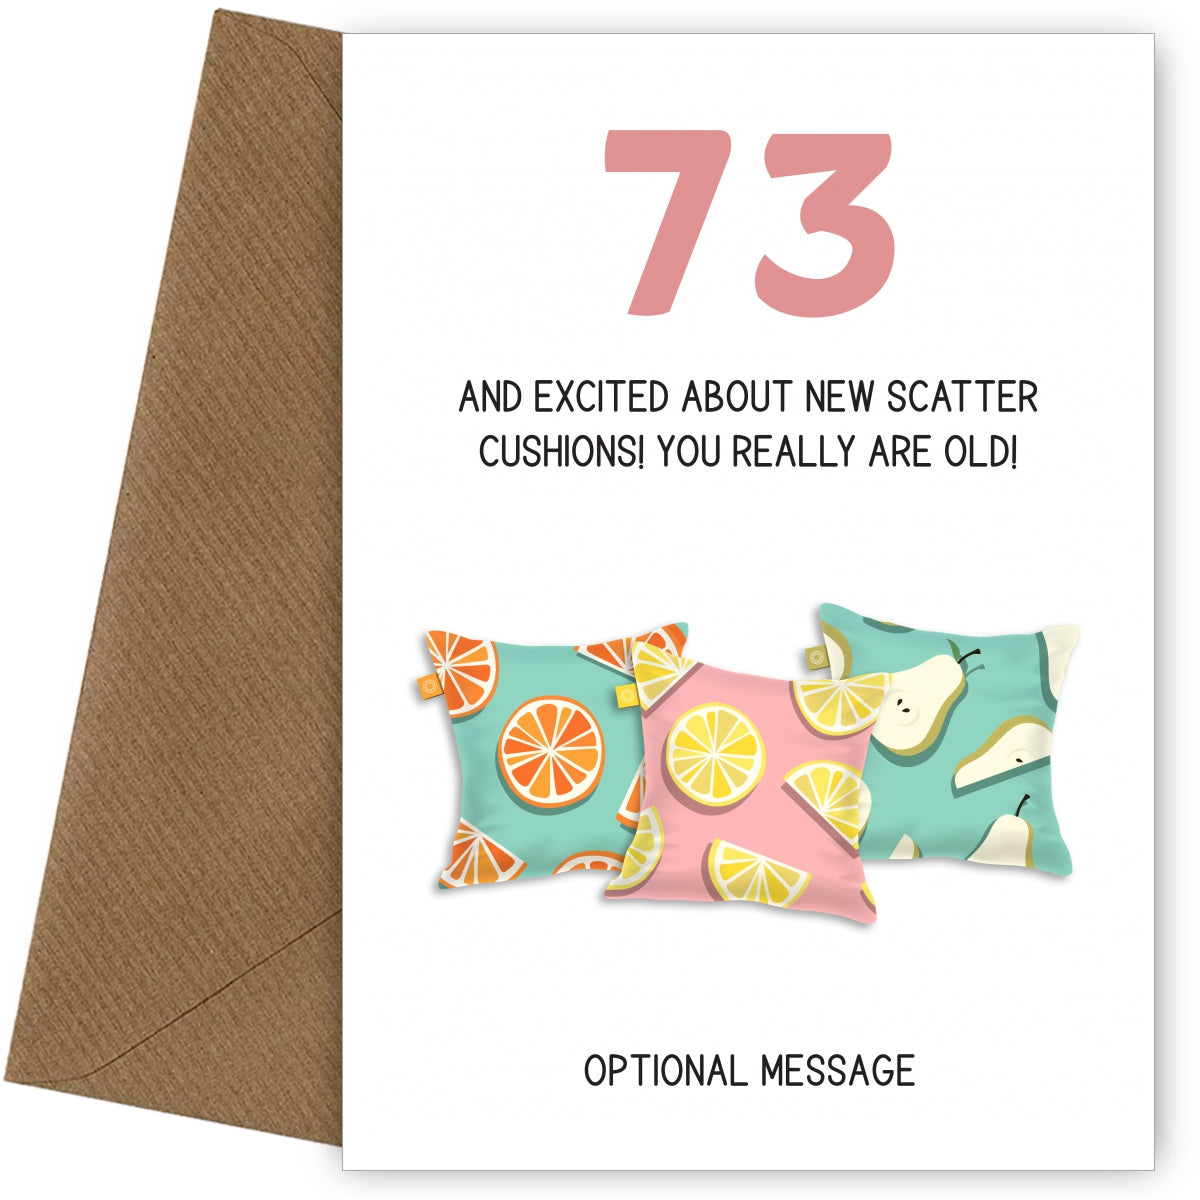 Happy 73rd Birthday Card - Excited About Scatter Cushions!